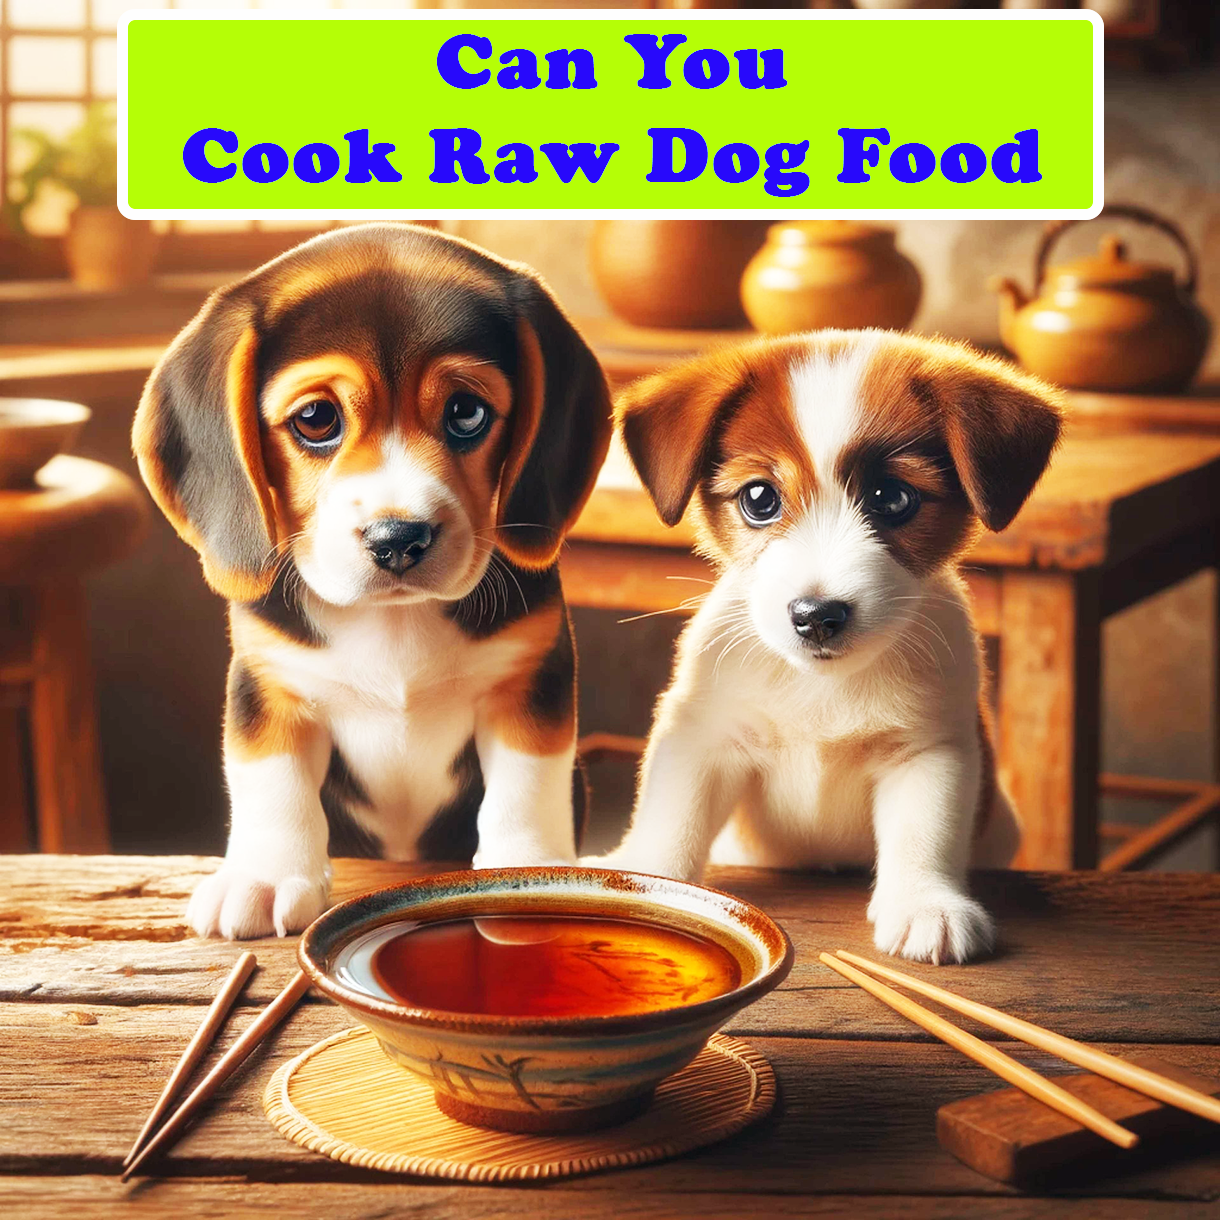 Can You Cook Raw Dog Food